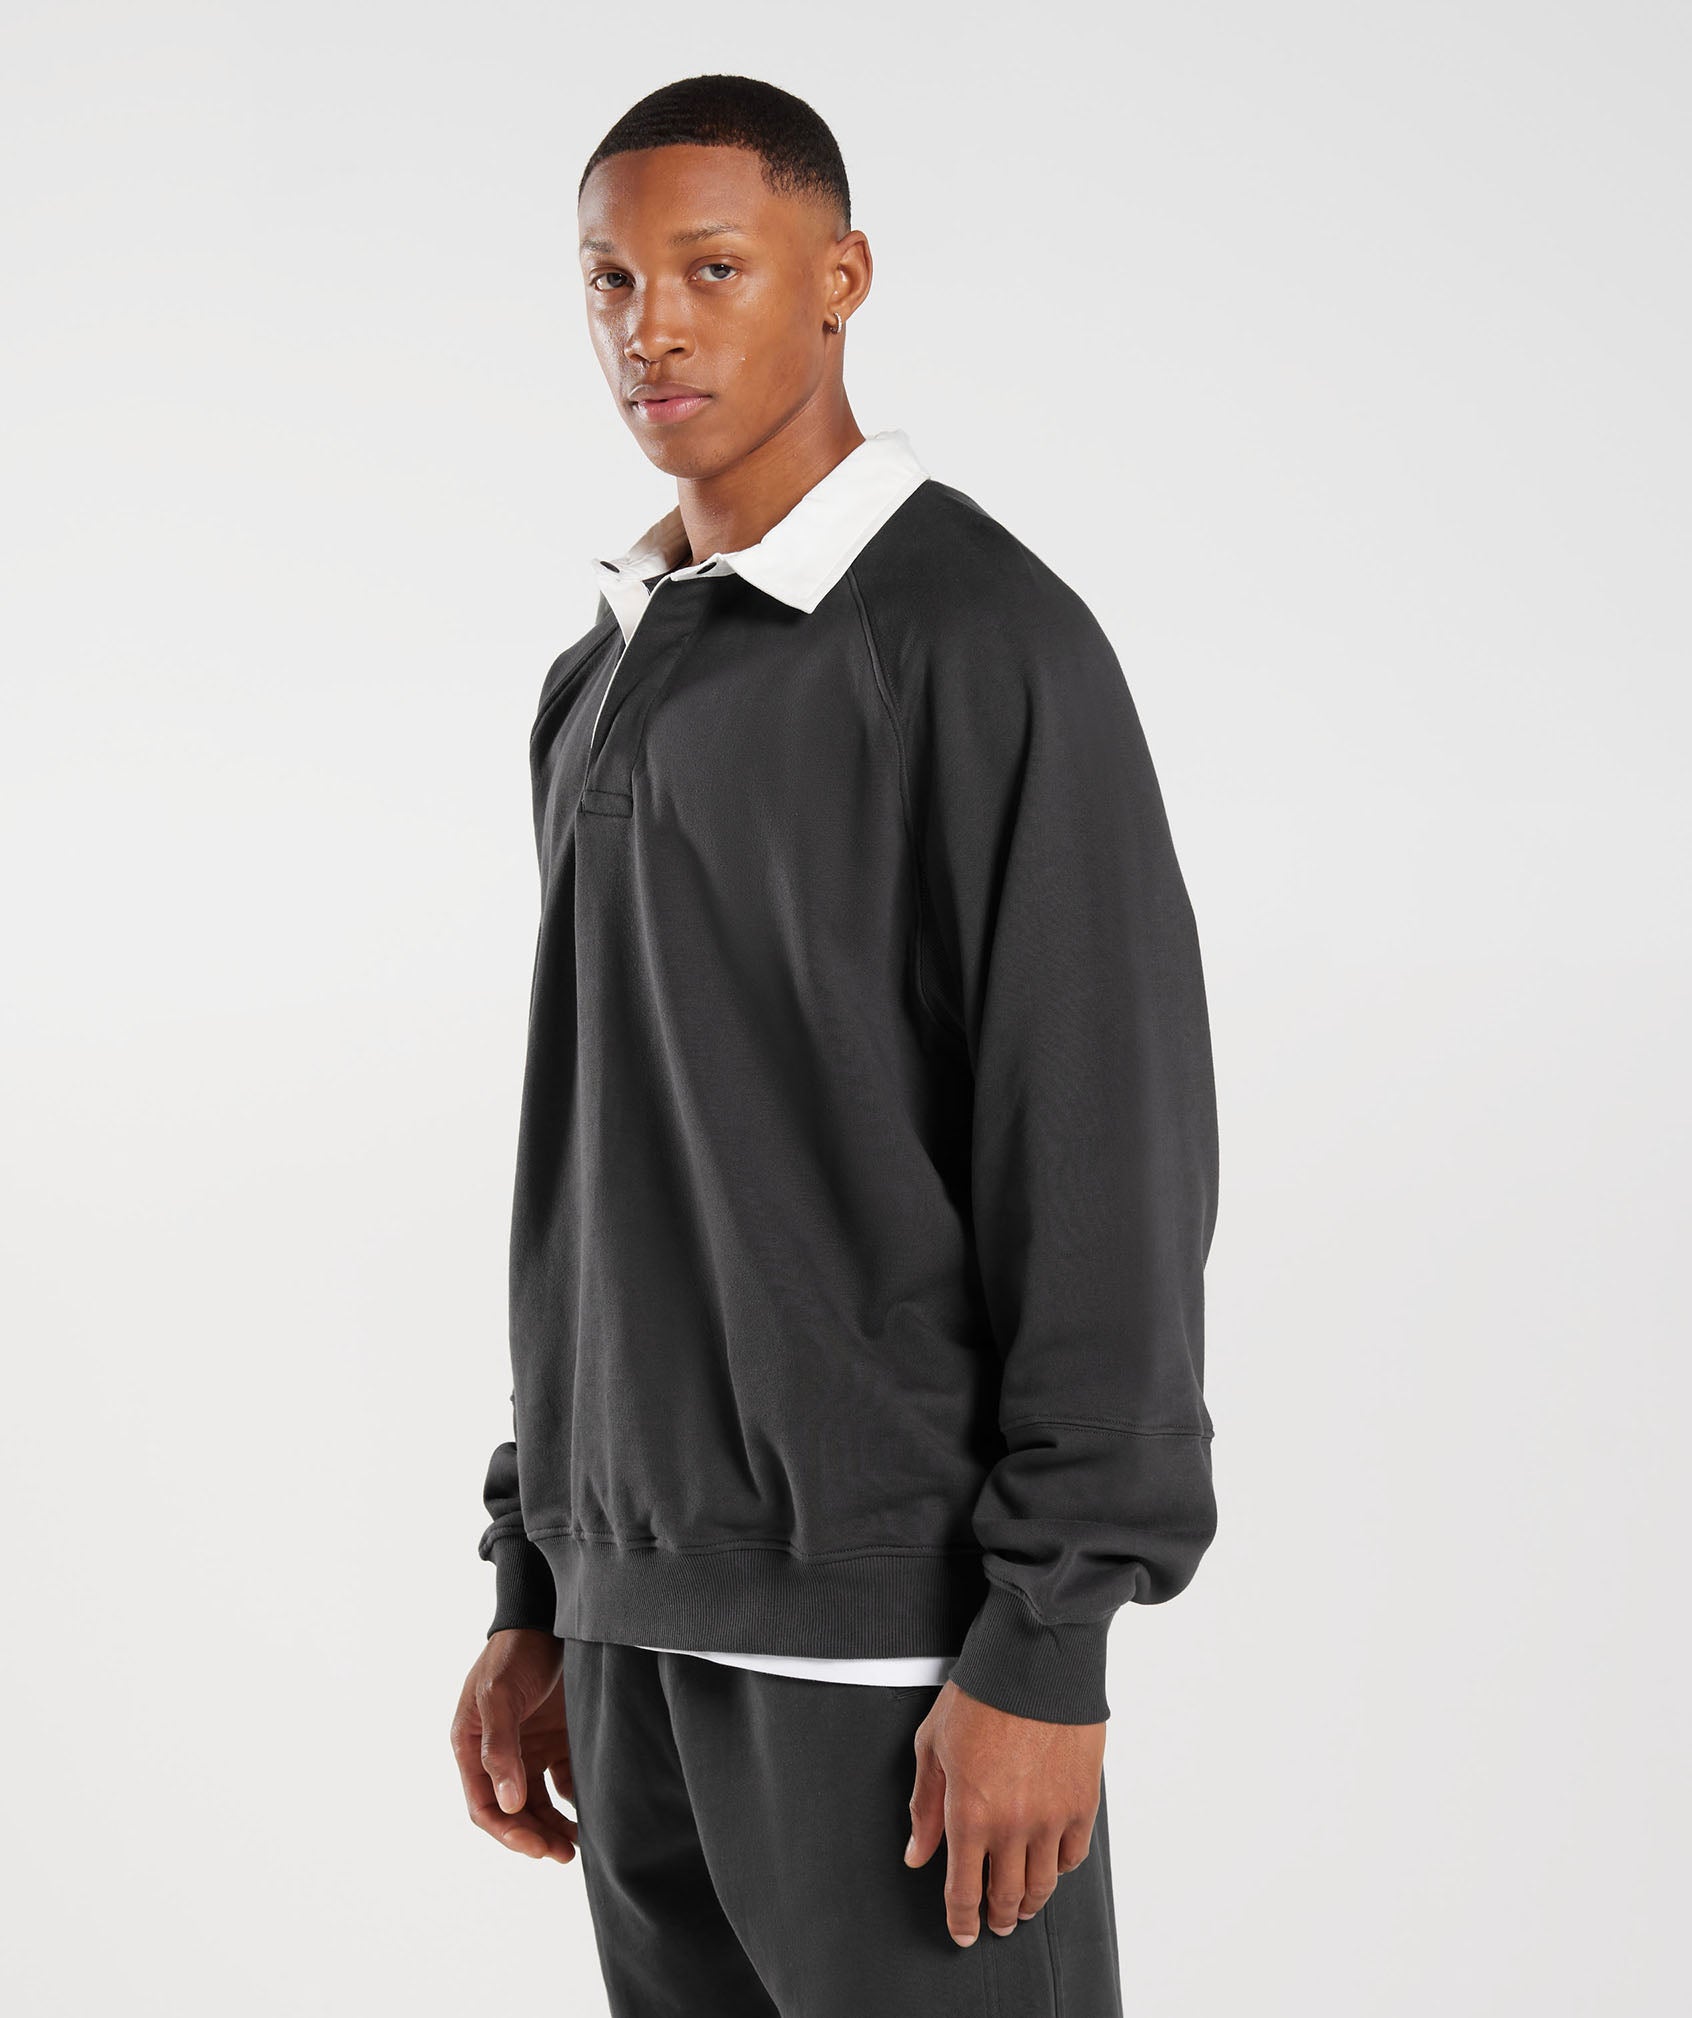 Rest Day Essentials Sweat Polo in Onyx Grey - view 3